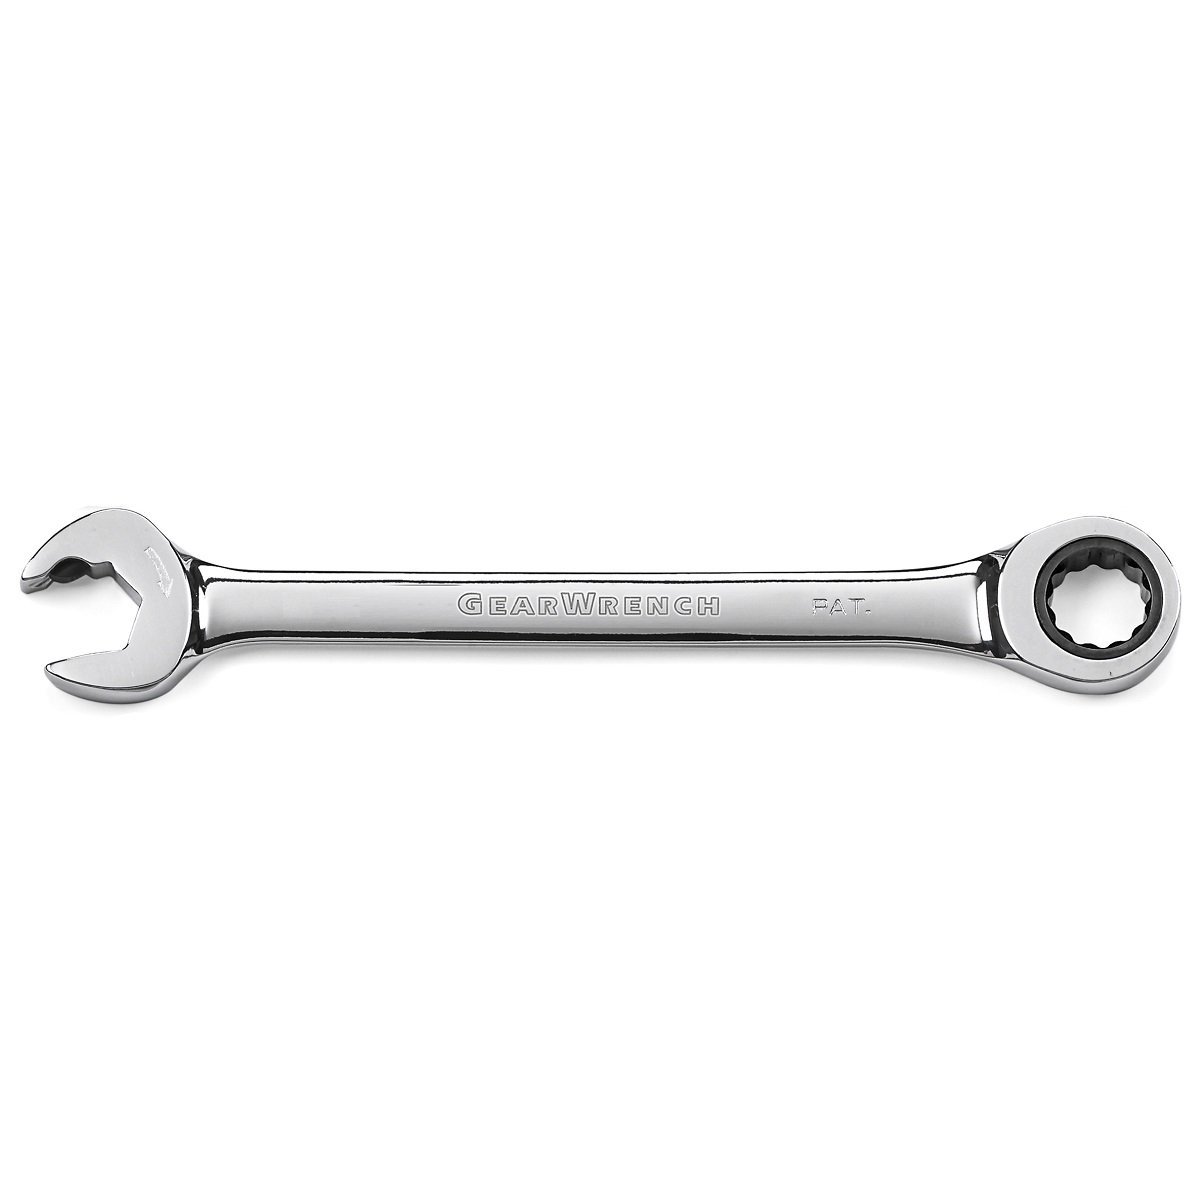 GearWrench Ratcheting Open End Combination Spanner Wrench 17mm 85517